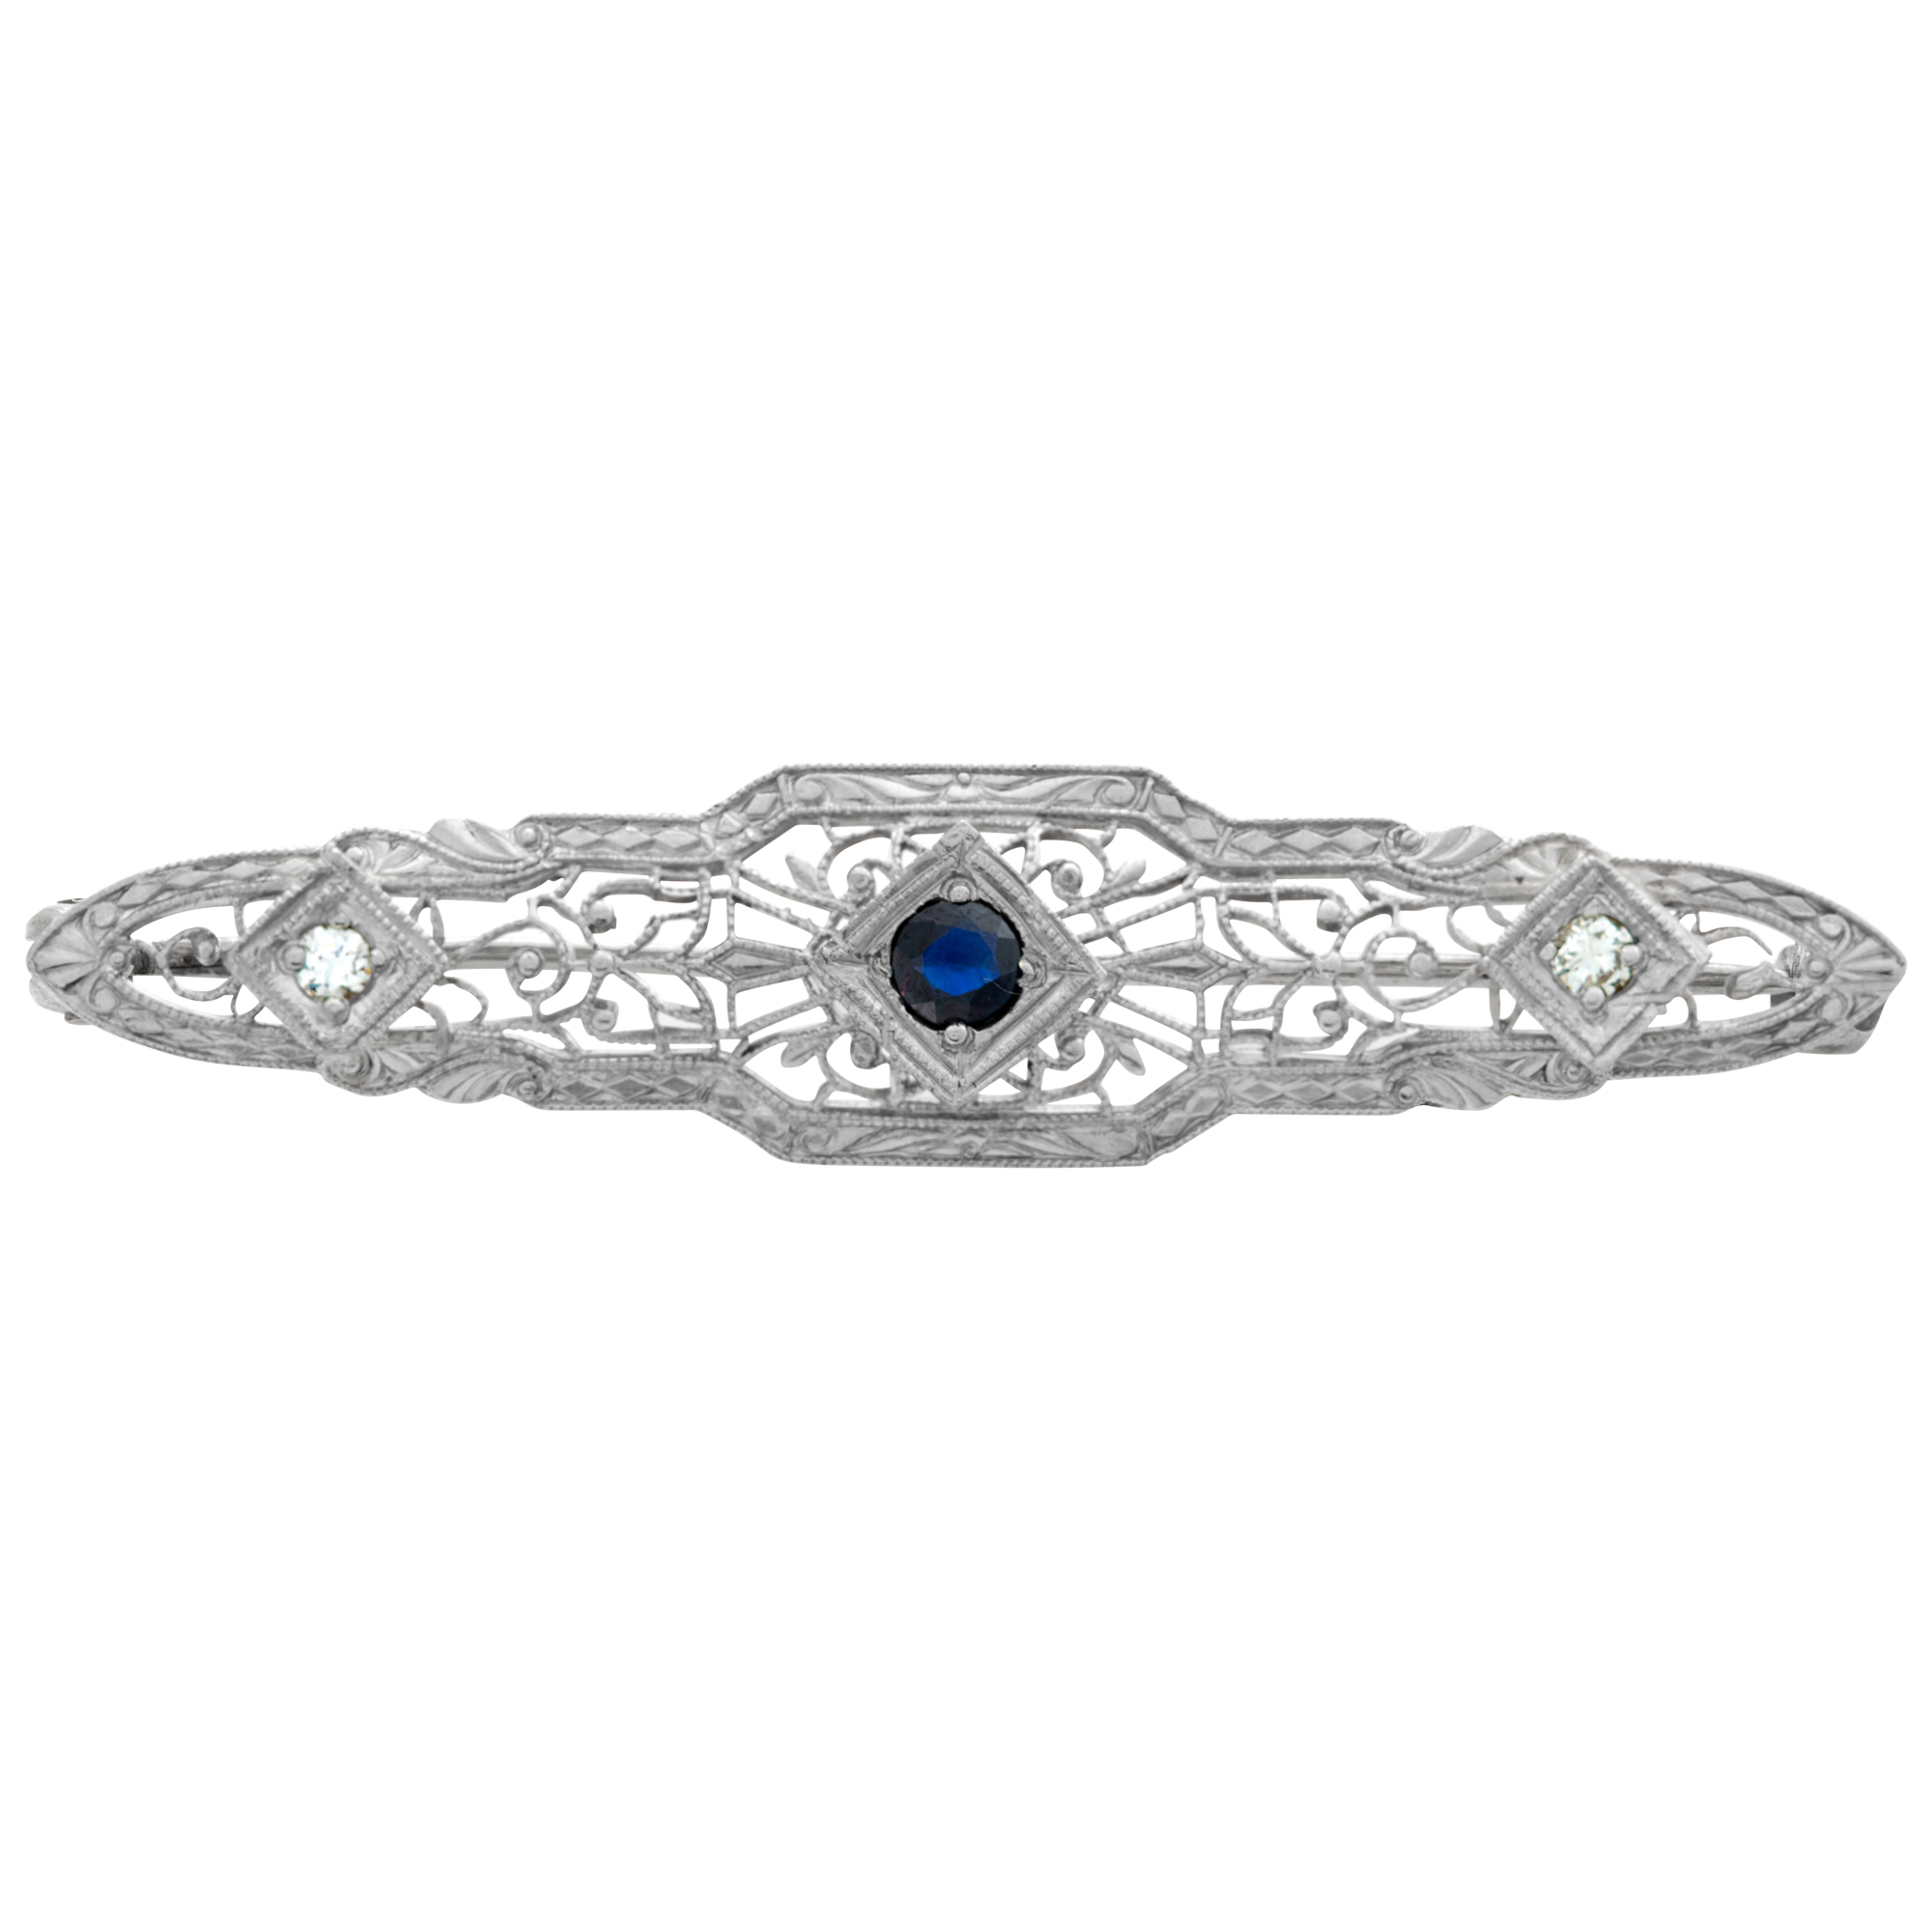 Edwardian pin in 14k white gold with center sapphire and 2 side accent diamonds (Stones)